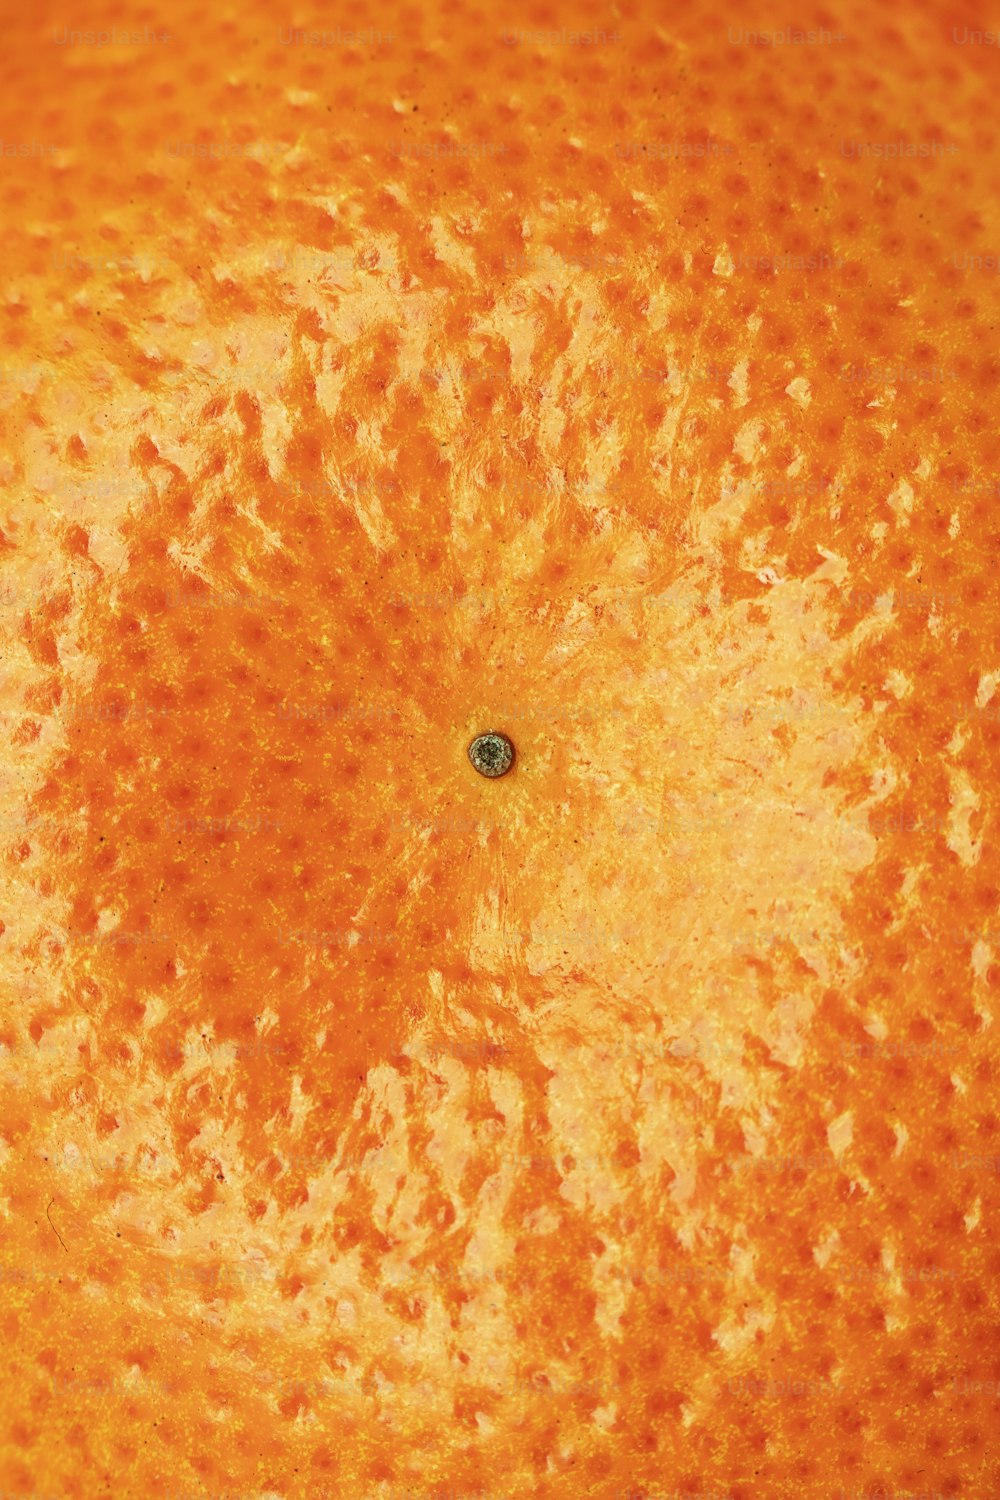 a close up of an orange with a black spot in the center